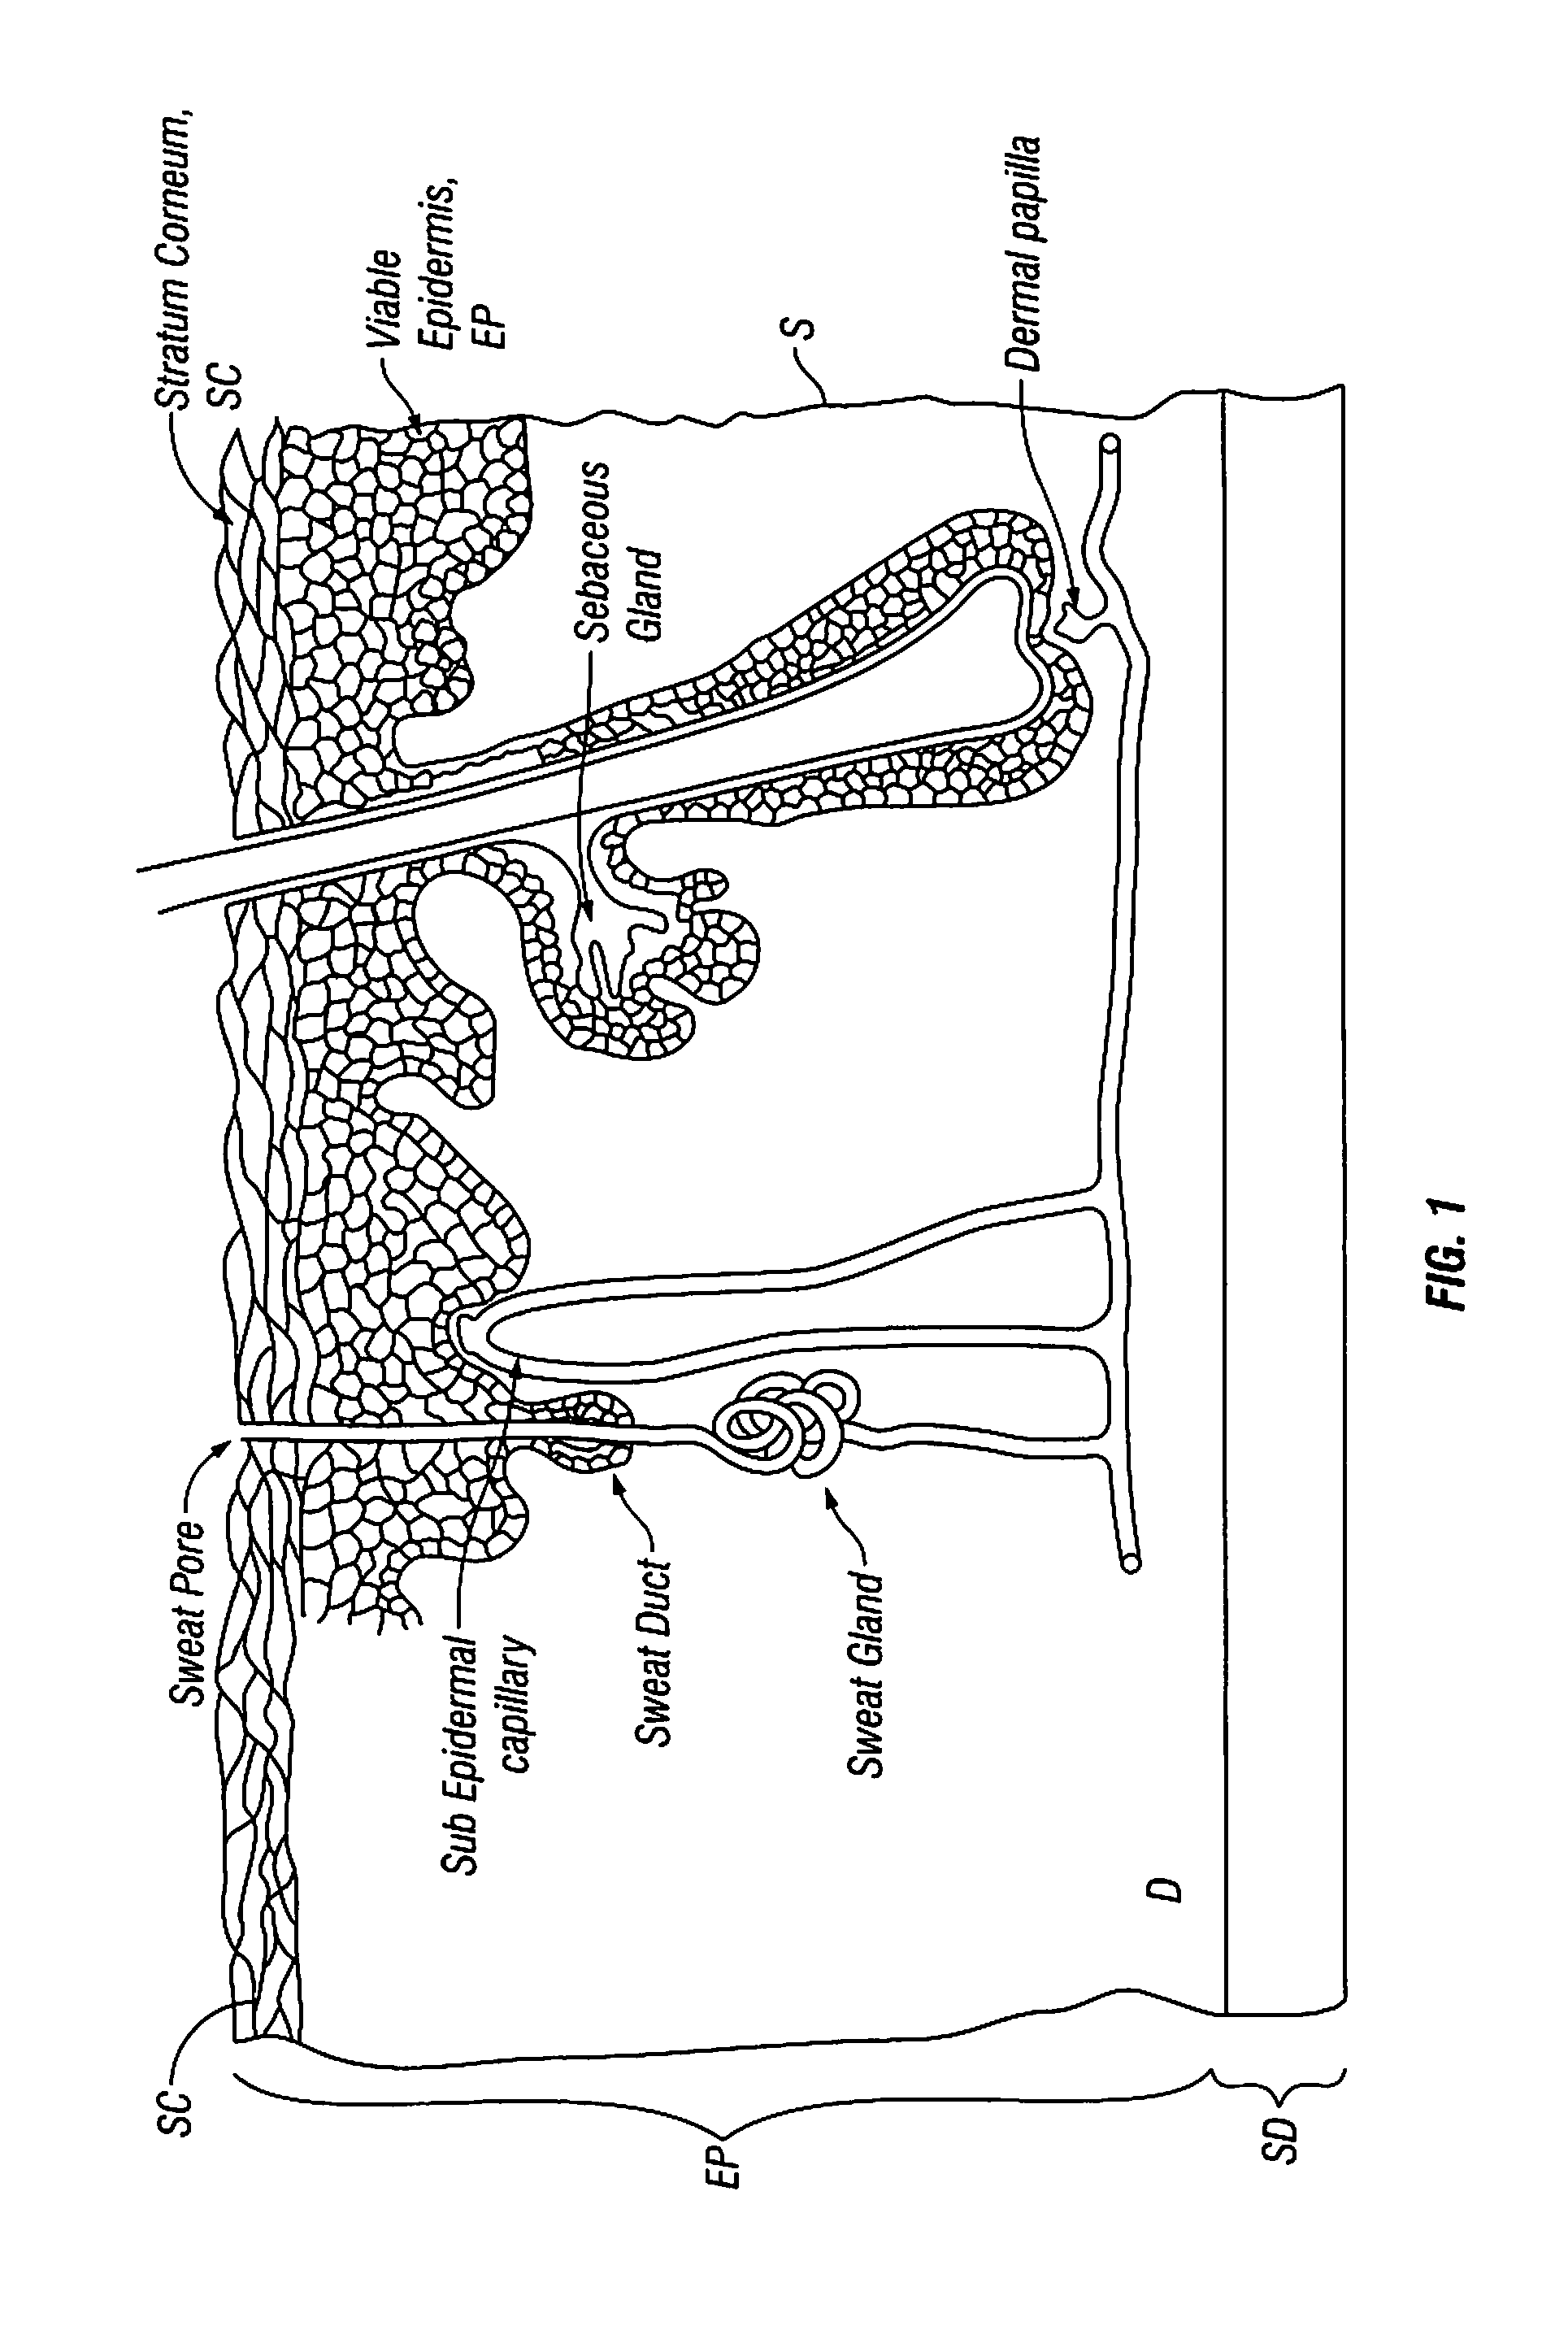 Patches and Methods for the Transdermal Delivery of Agents to Treat Hair Loss